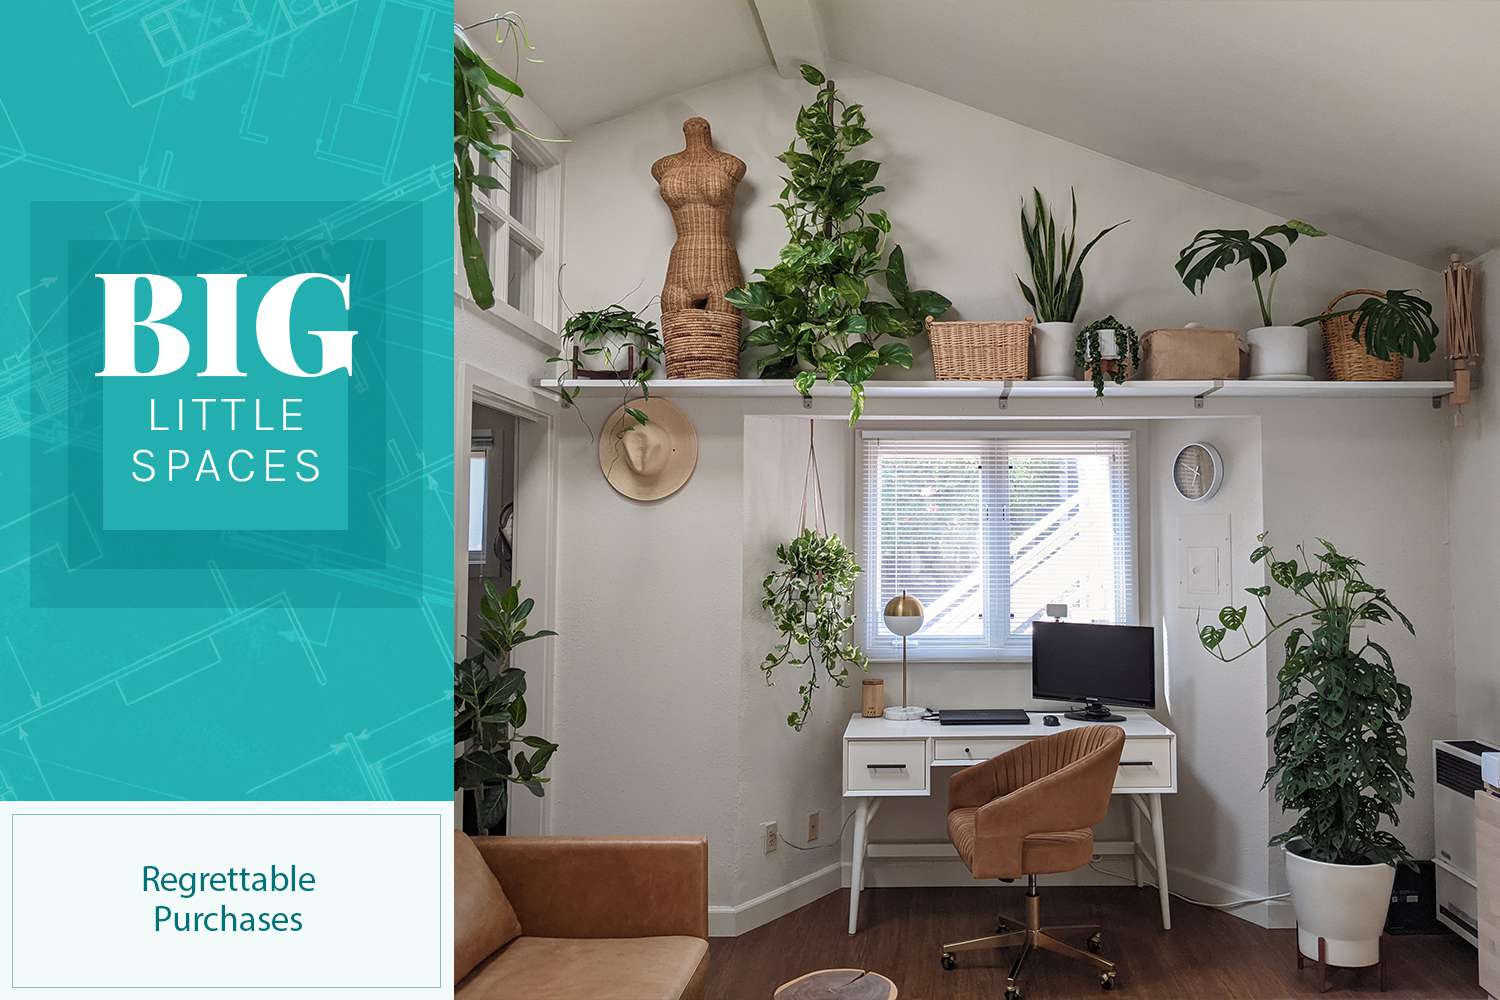 Denise Bayron's tiny home includes many plants, some of which she regrets purchasing